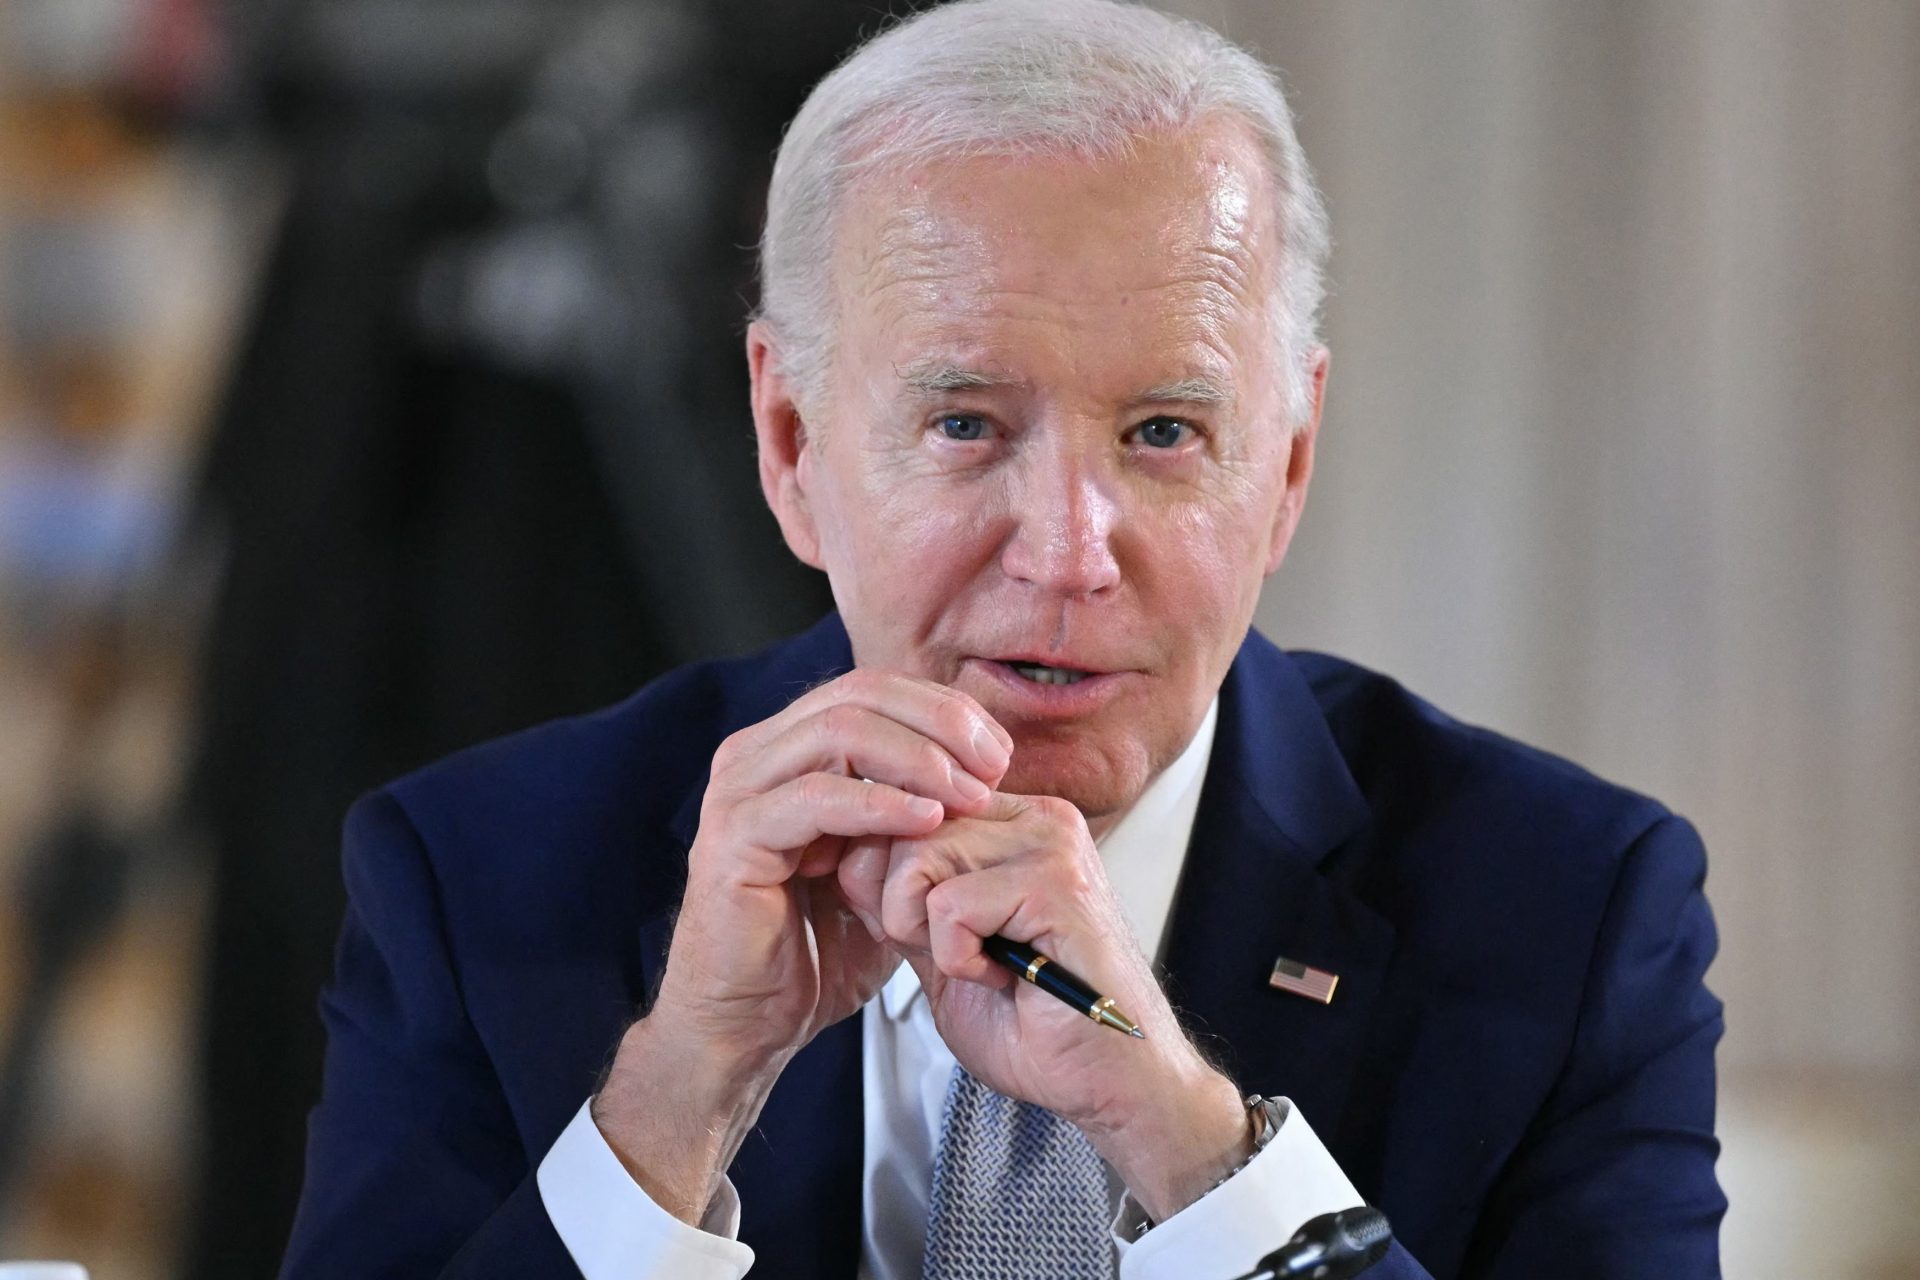 Biden: Now the American people must do what the court should have